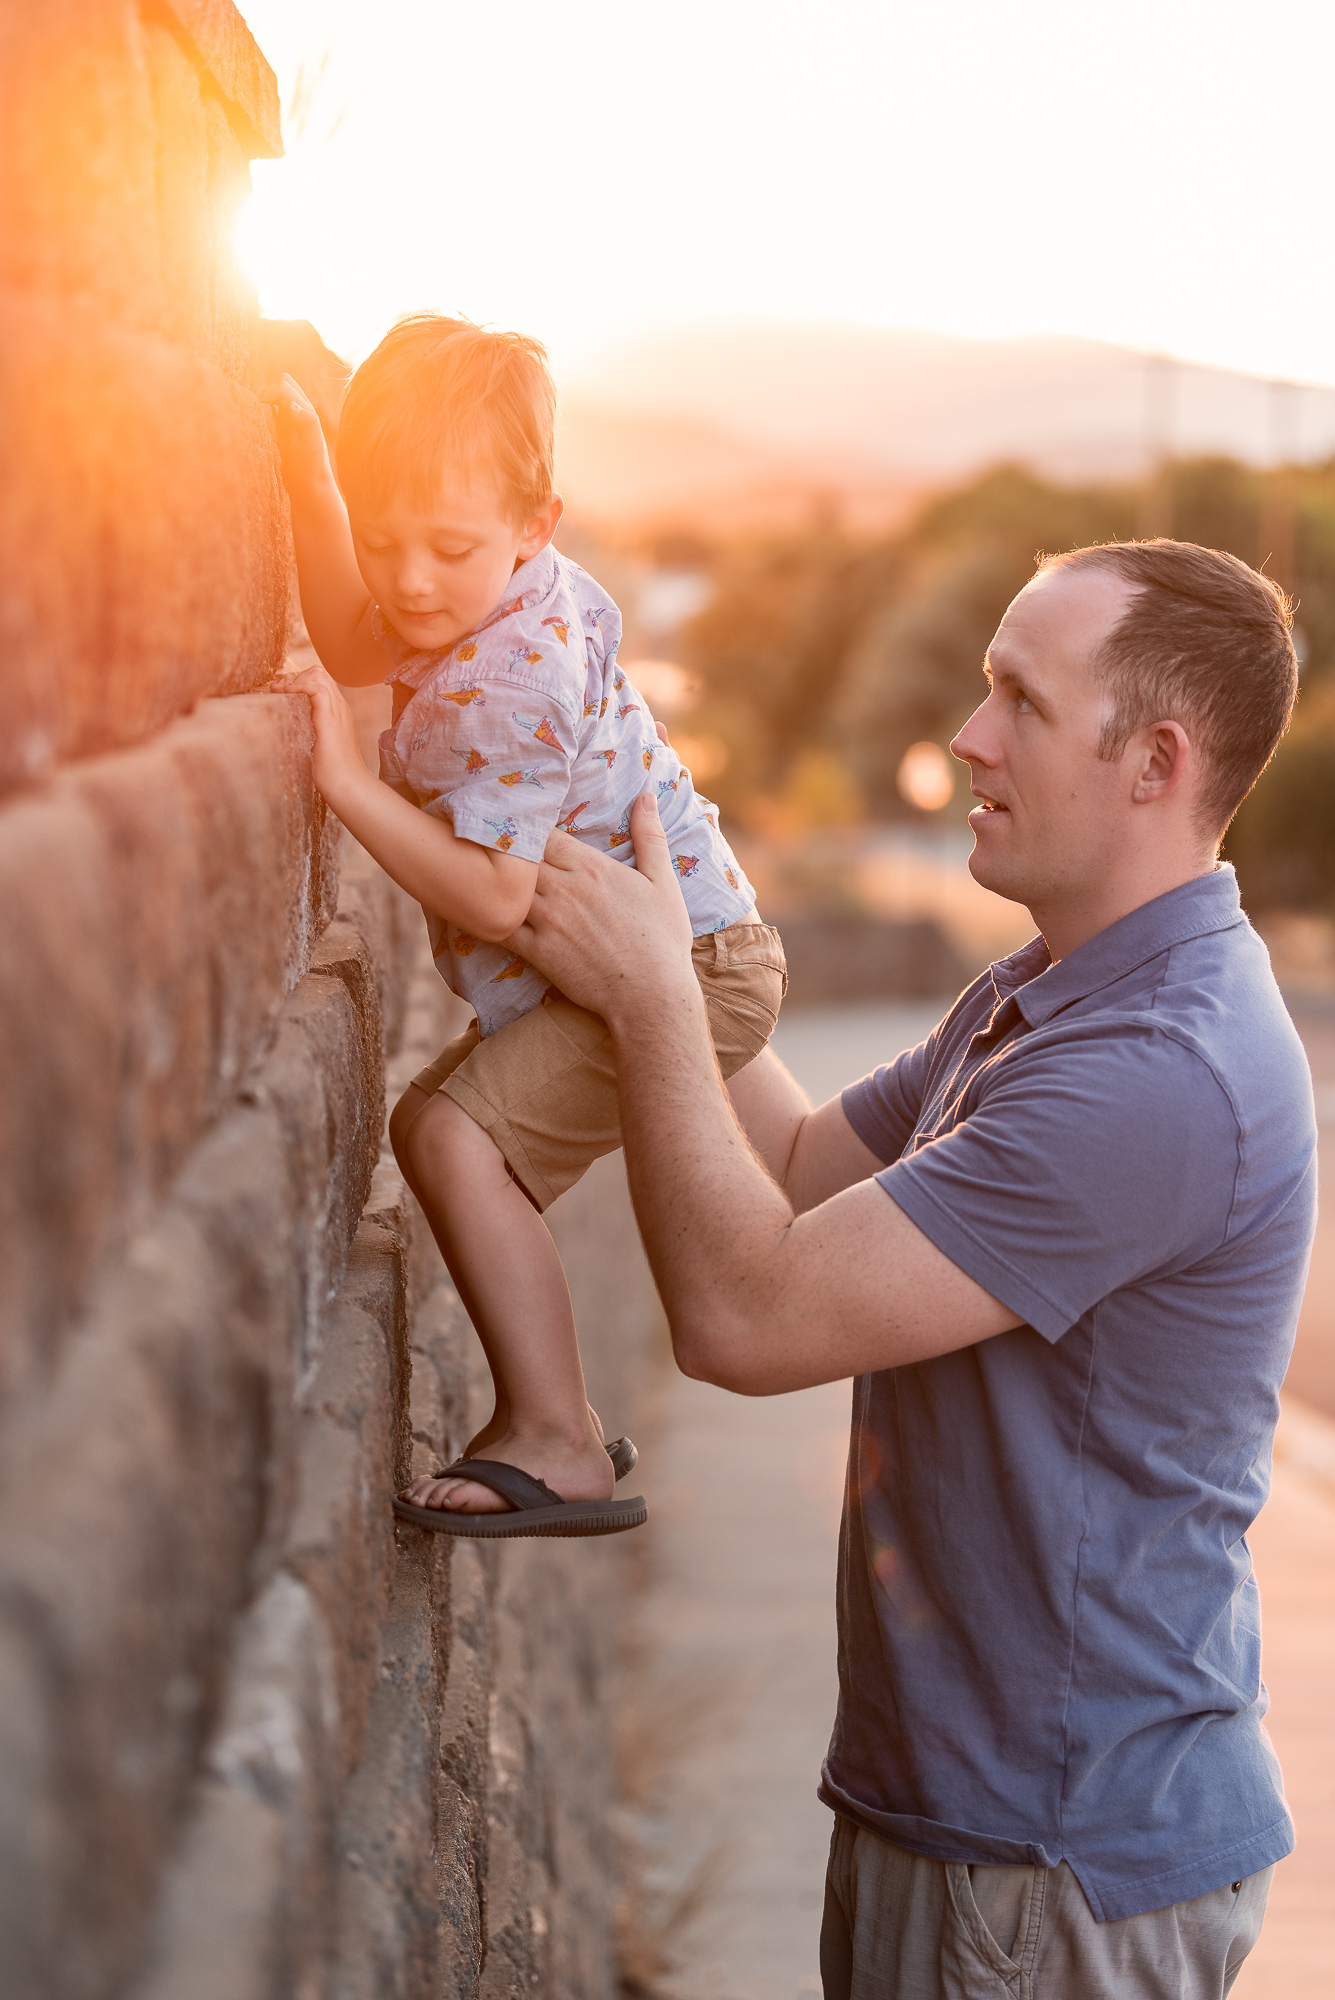 Child climbing a wall with help from his father Things to Do in Bend